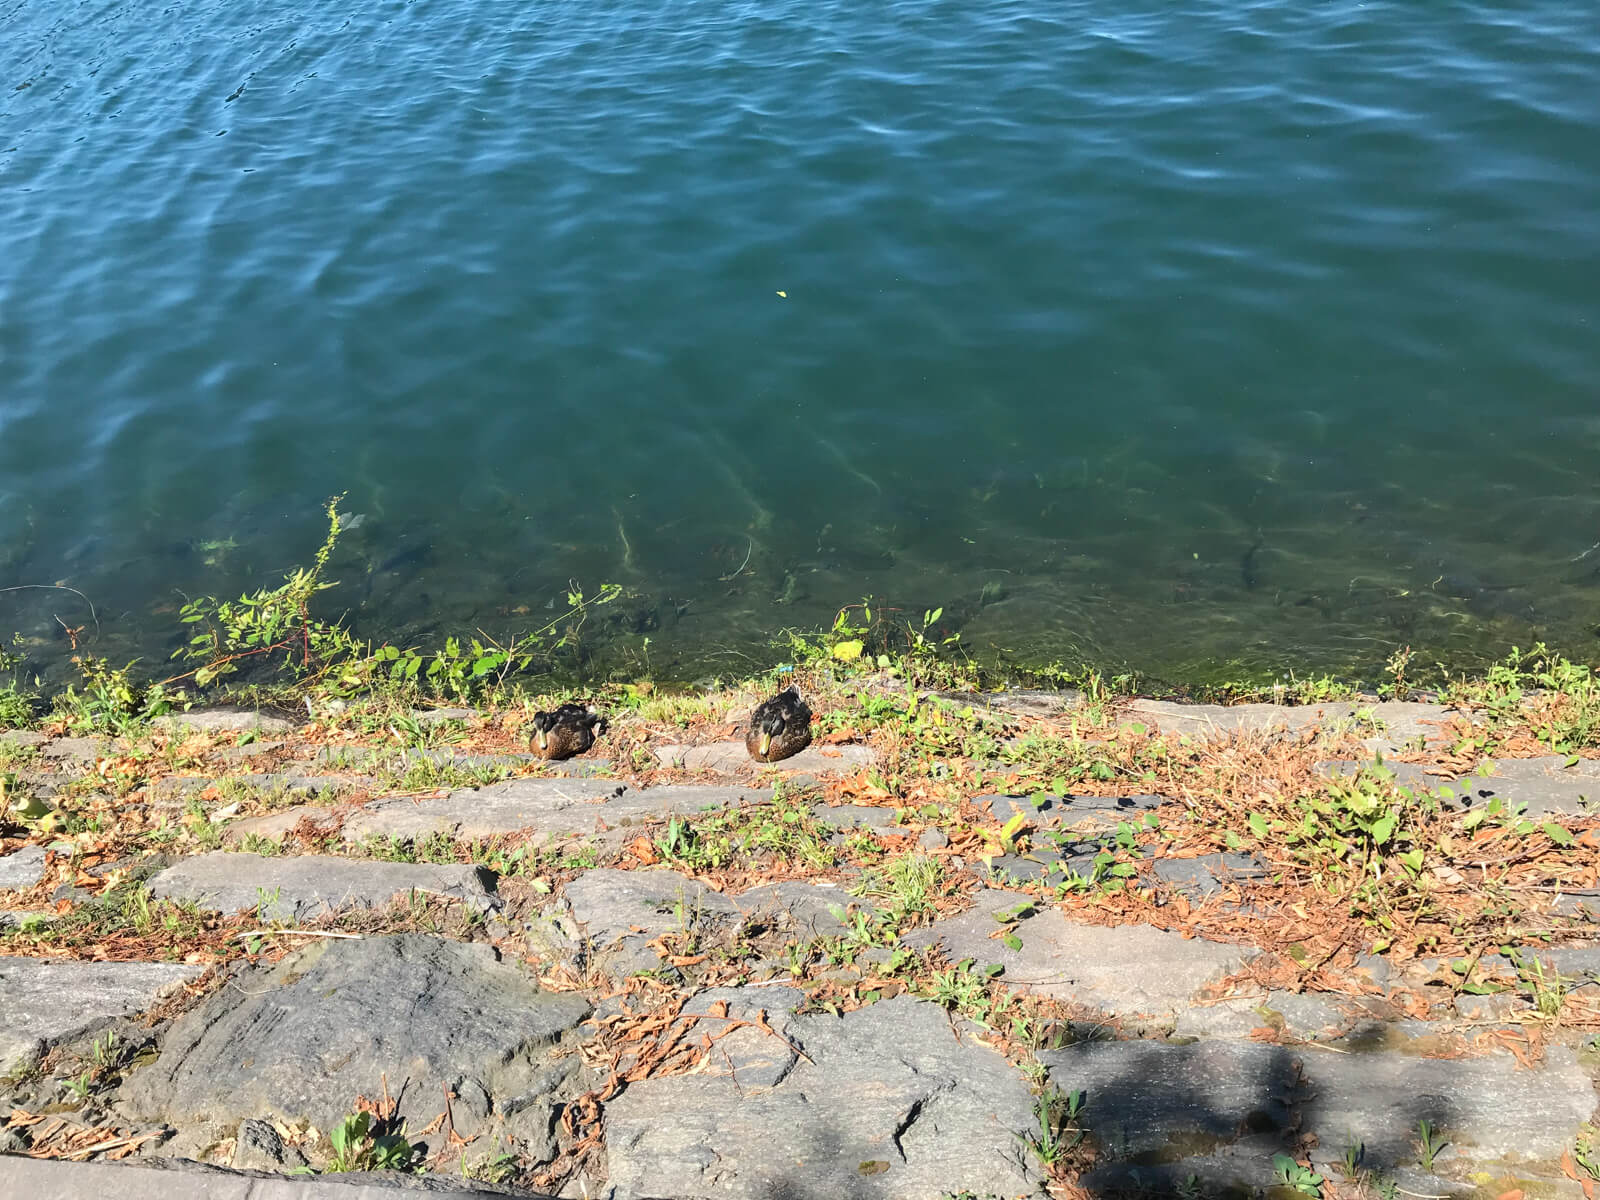 Two small ducks sitting on a rocky stone area at the edge of a body of water